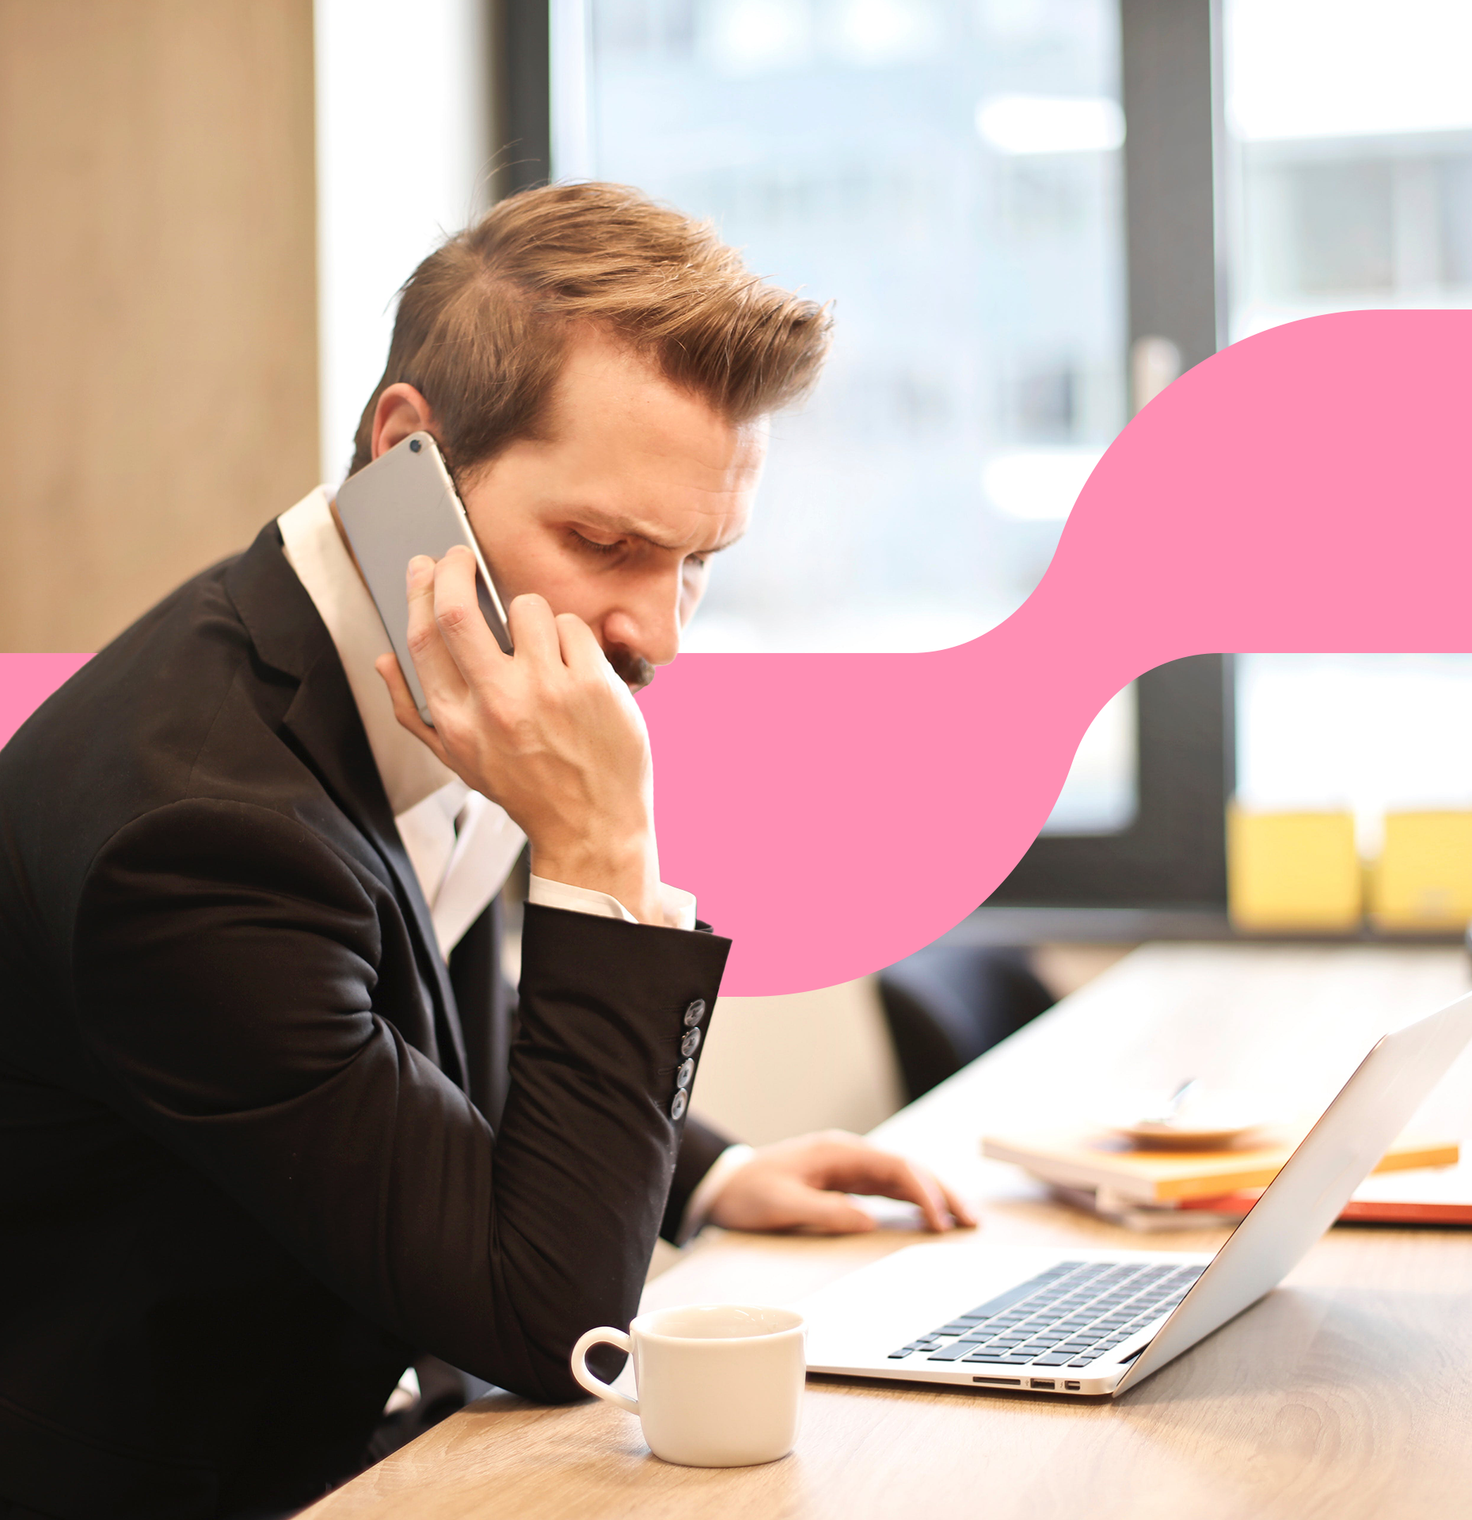 Stock photo of a man in a black suit seated at a desk, holding a phone to his ear with a laptop and a cup of coffee in front of him. A pink wave design overlays part of the background.